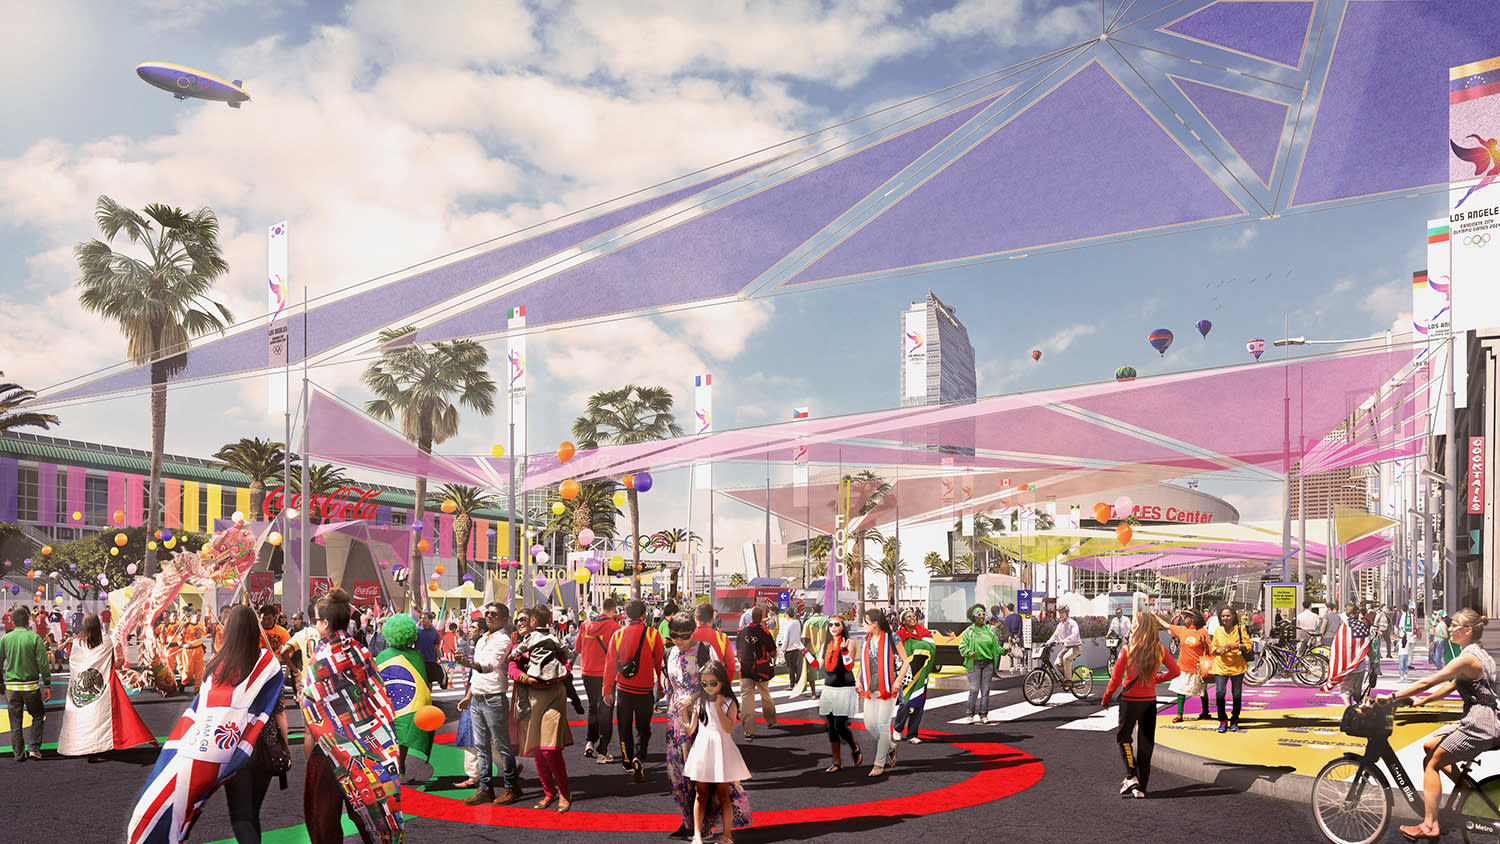 LA 2024 Los Angeles’ vision for the 2024 Olympics